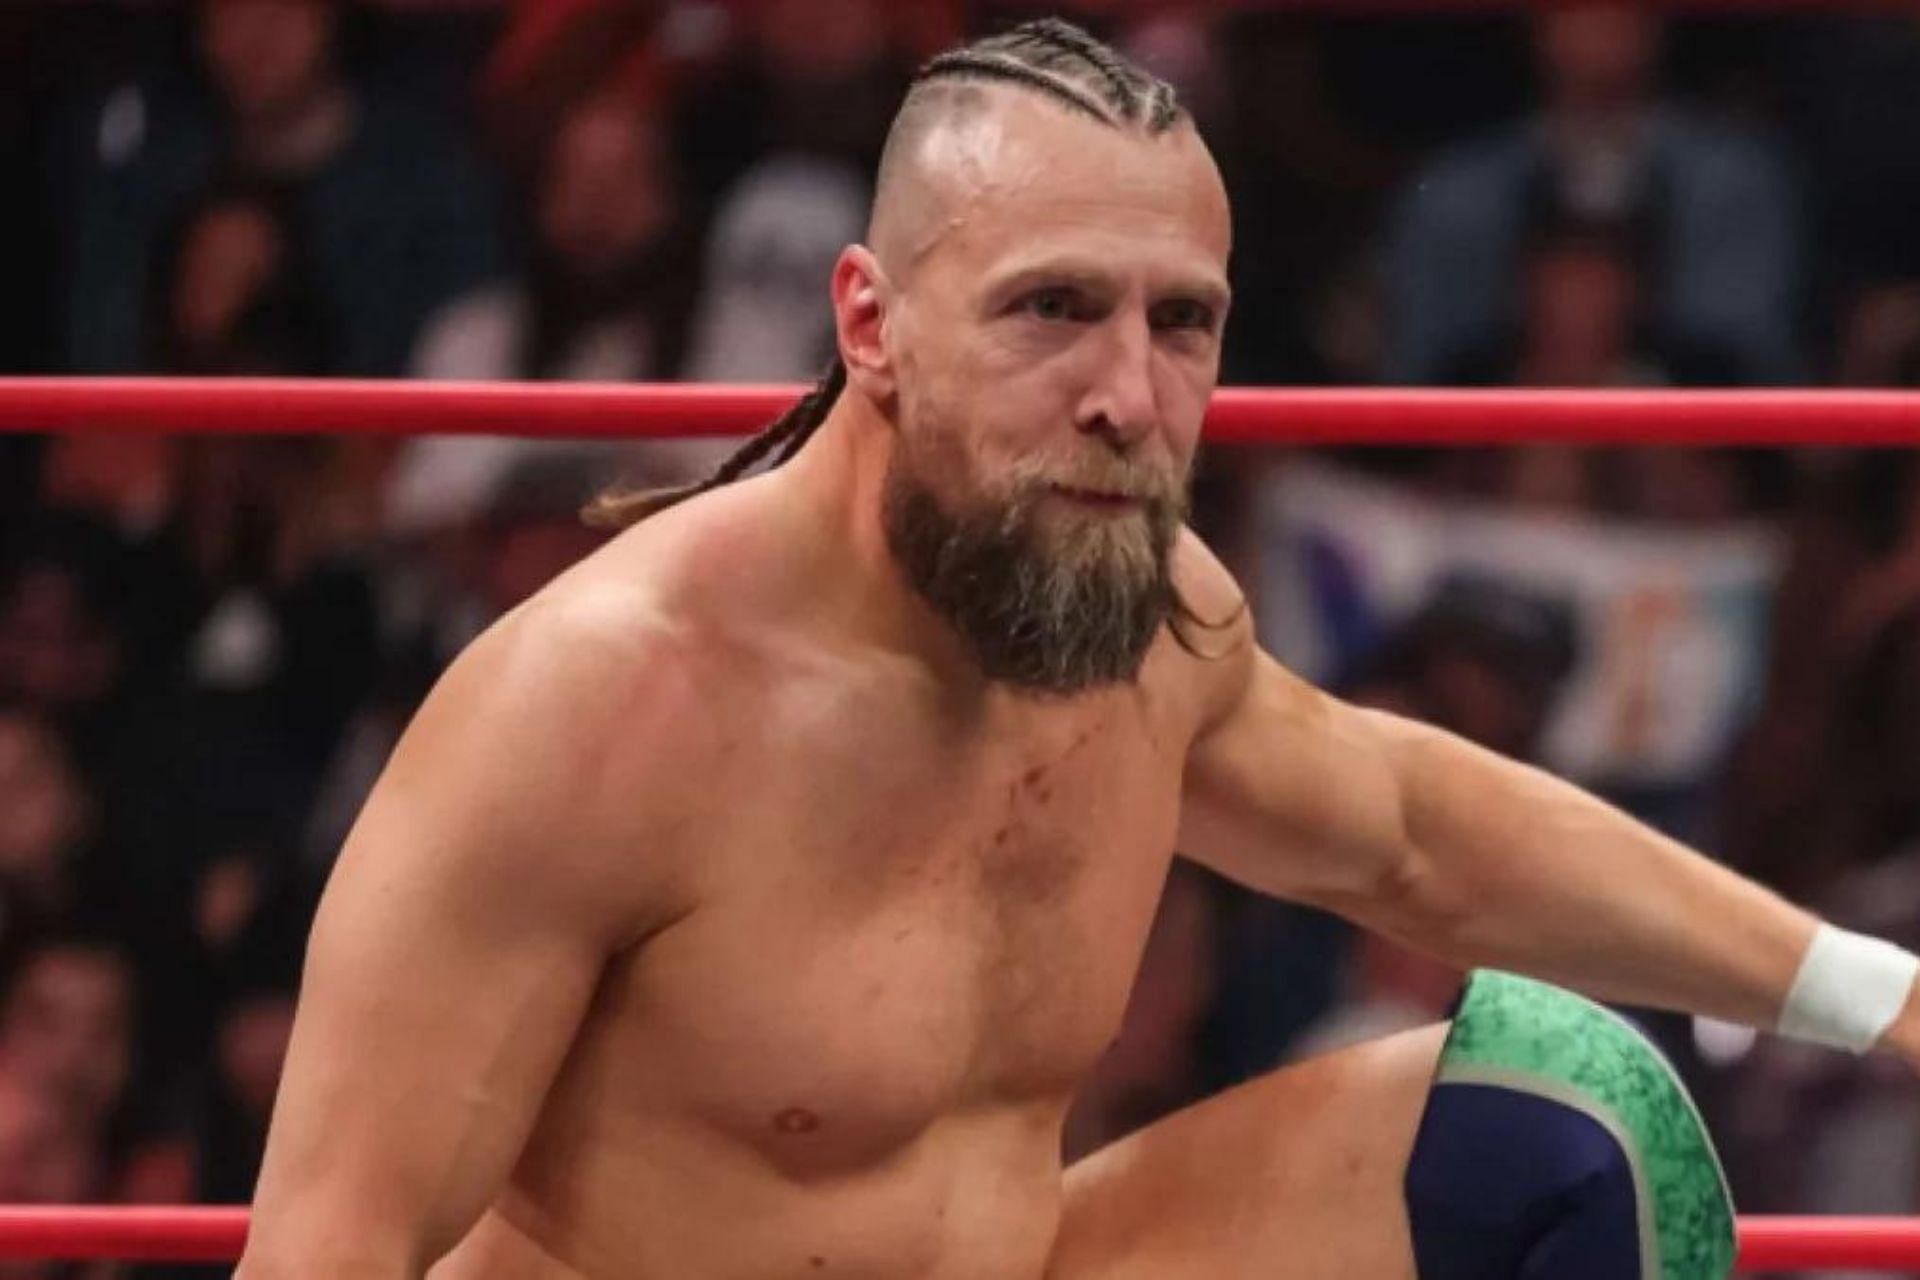 A young wrestler has revealed his experience wrestling Bryan Danielson